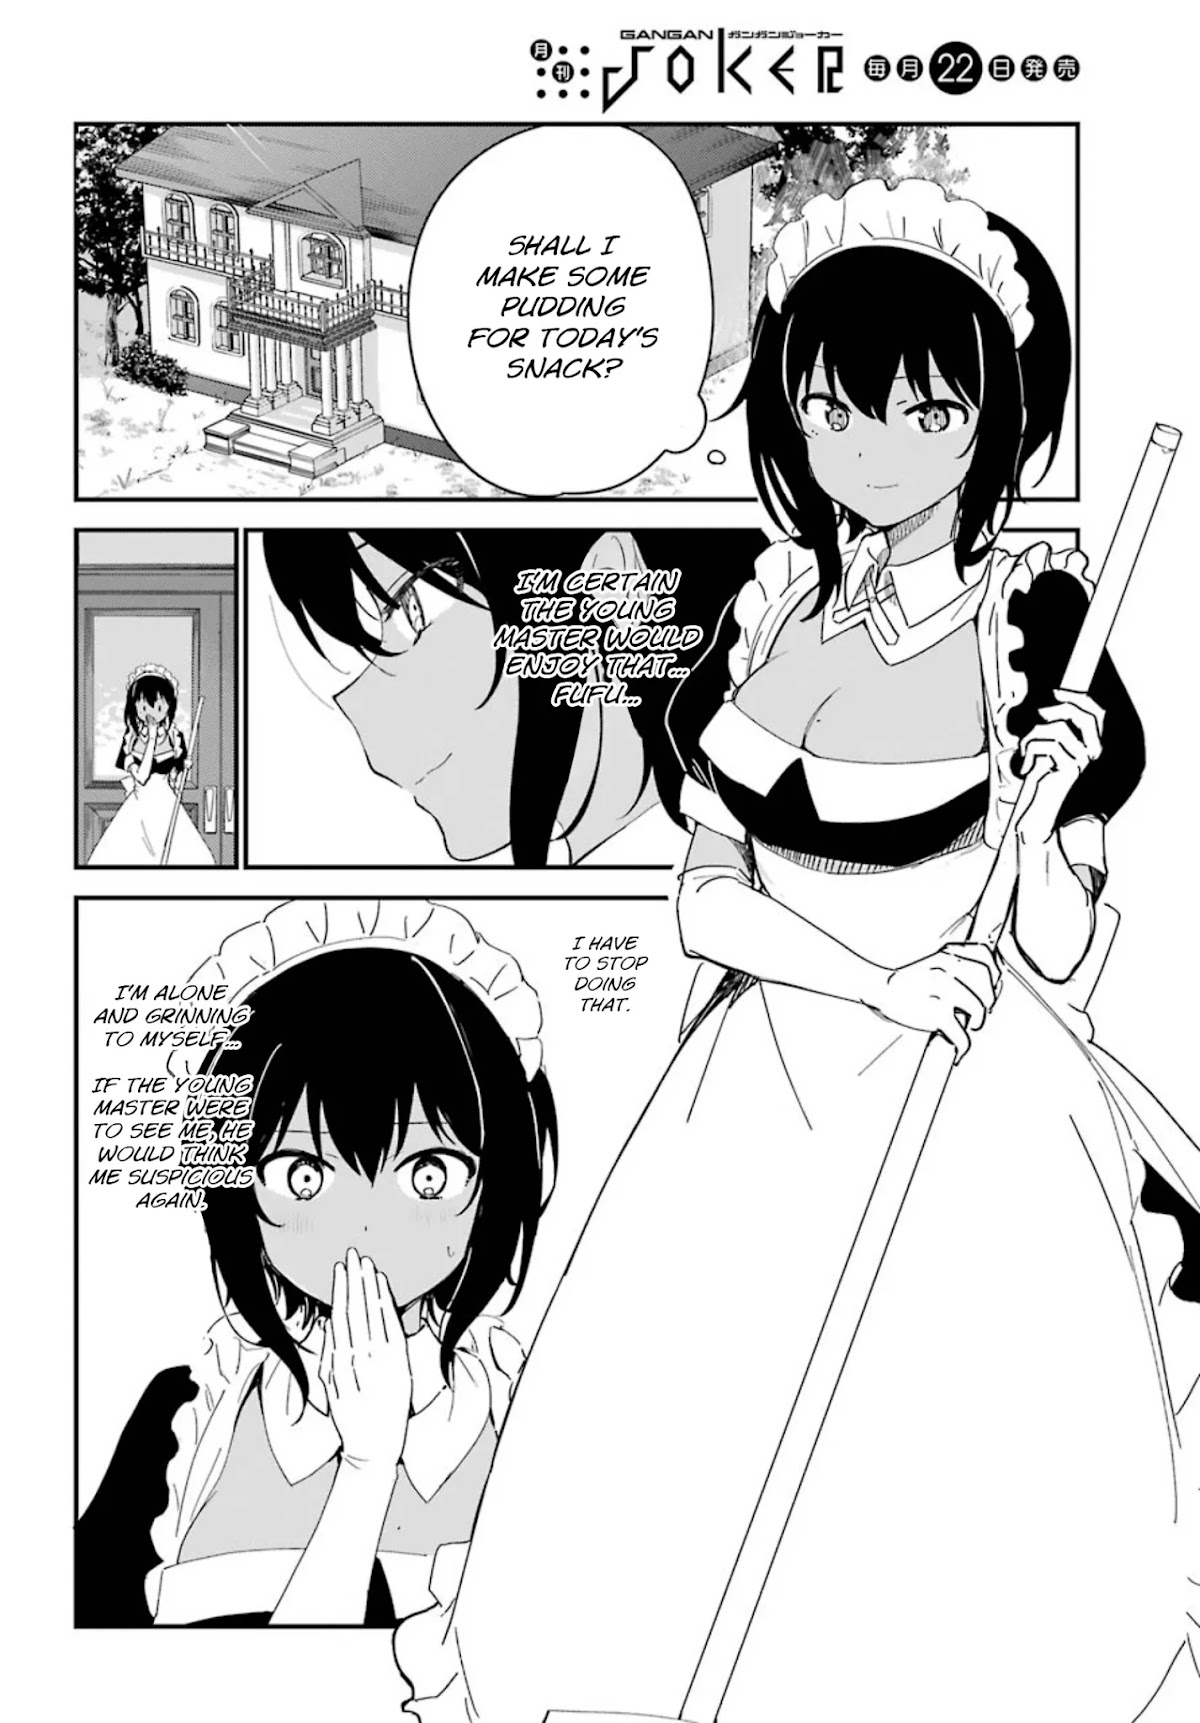 My Recently Hired Maid Is Suspicious (Serialization) - Page 2